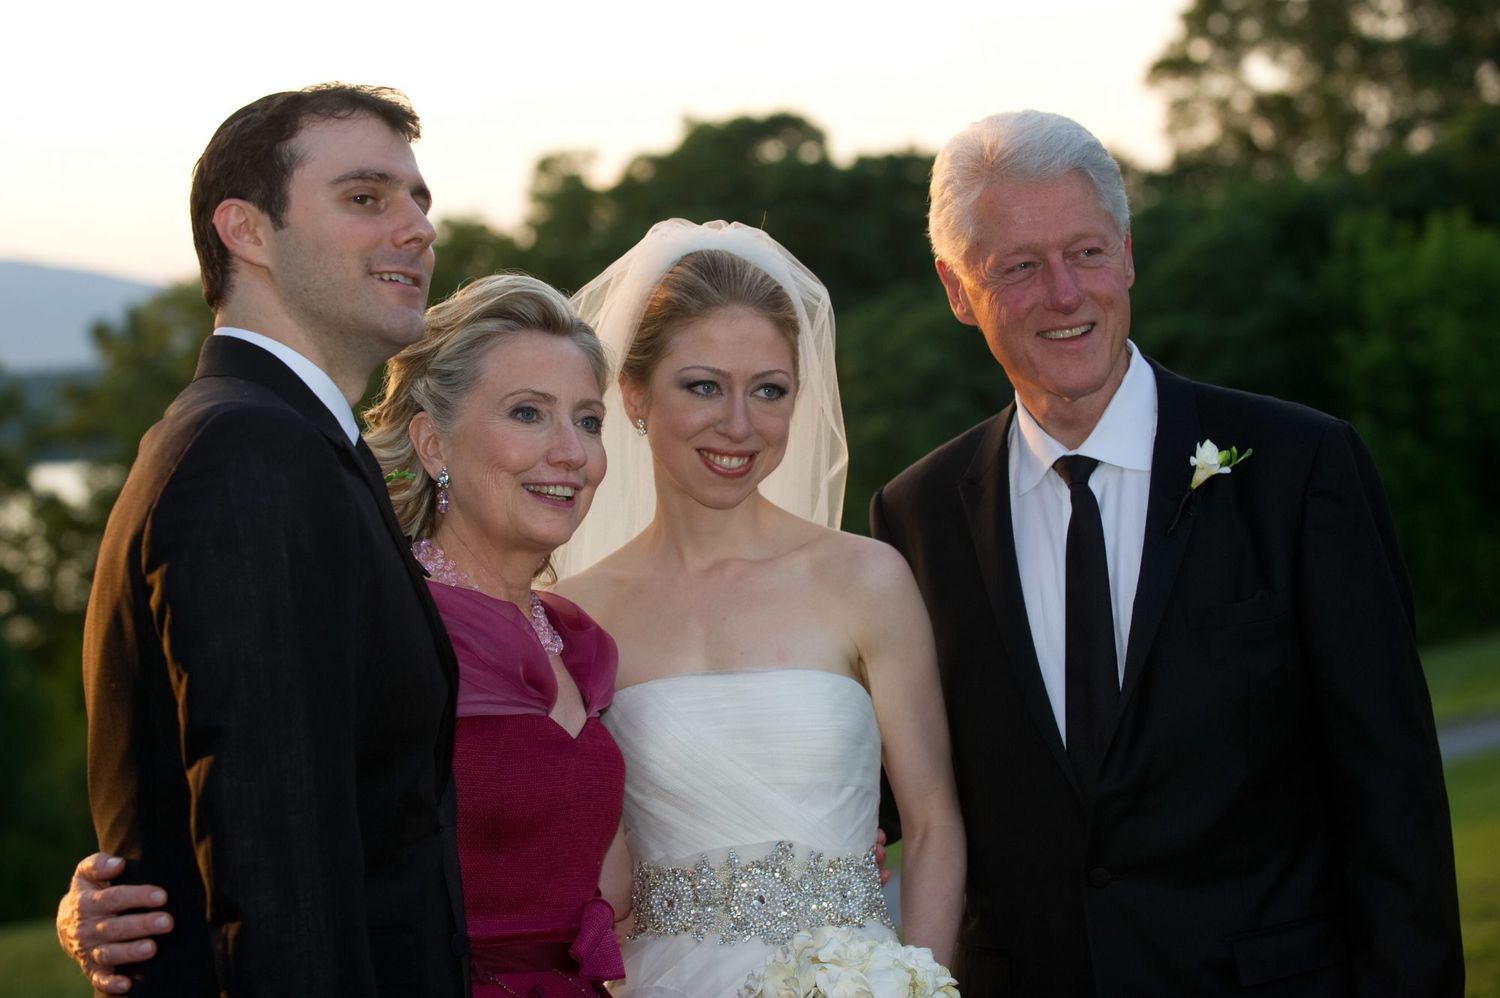 Chelsea Clinton and Marc Mezvinsky wedding photo with Bill and Hillary Clinton